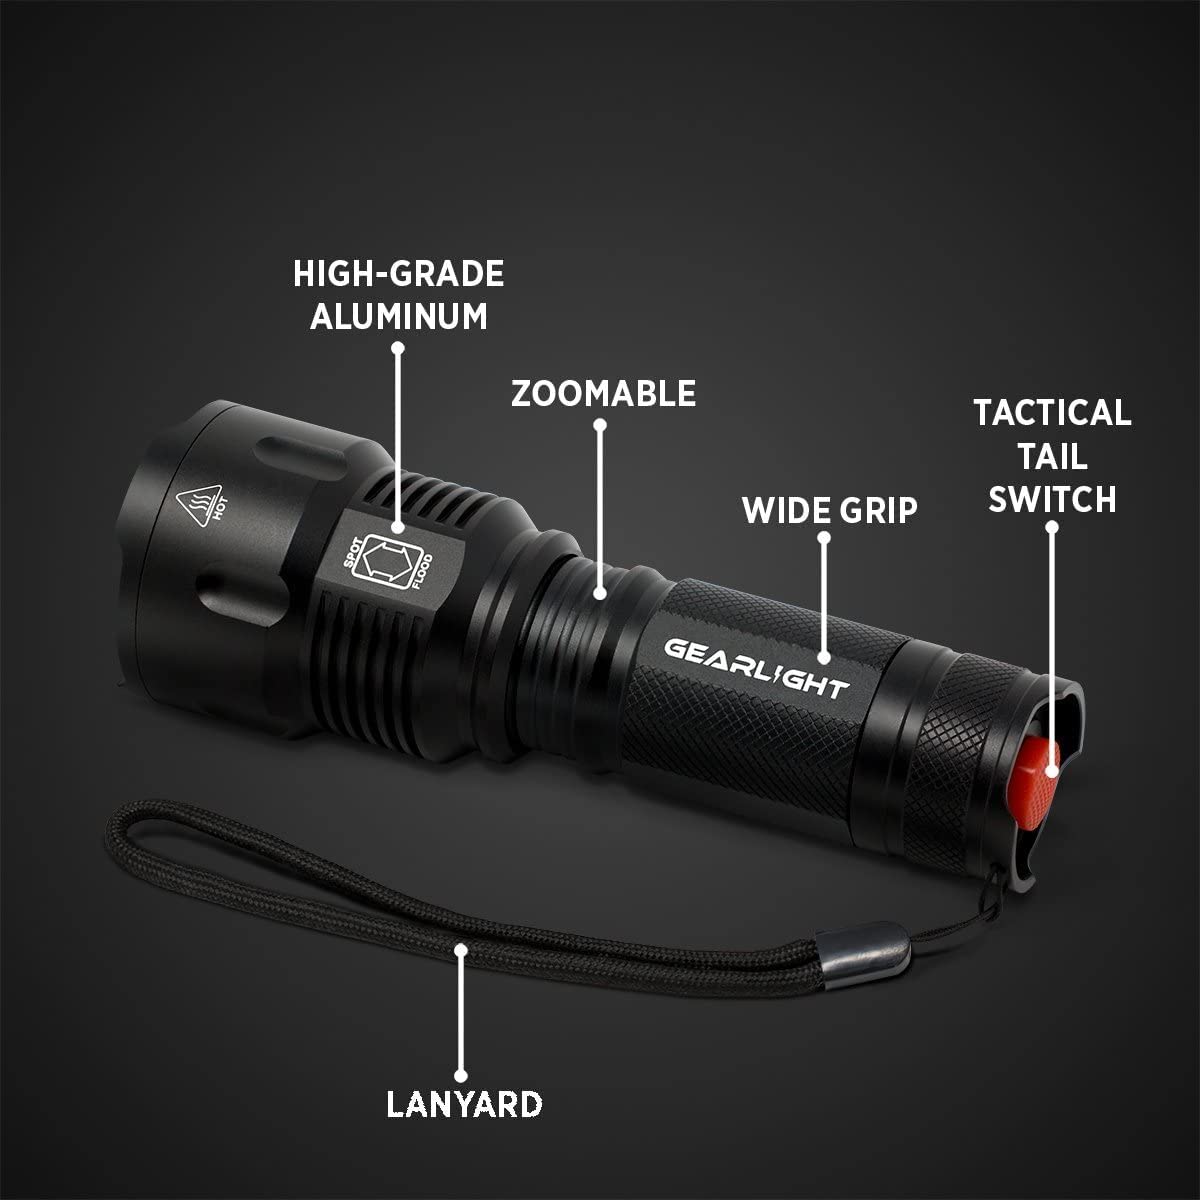 High-Powered LED Flashlight S1200 - Mid Size, Zoomable, Water Resistant, Handheld Light - High Lumen Camping, Outdoor, Emergency